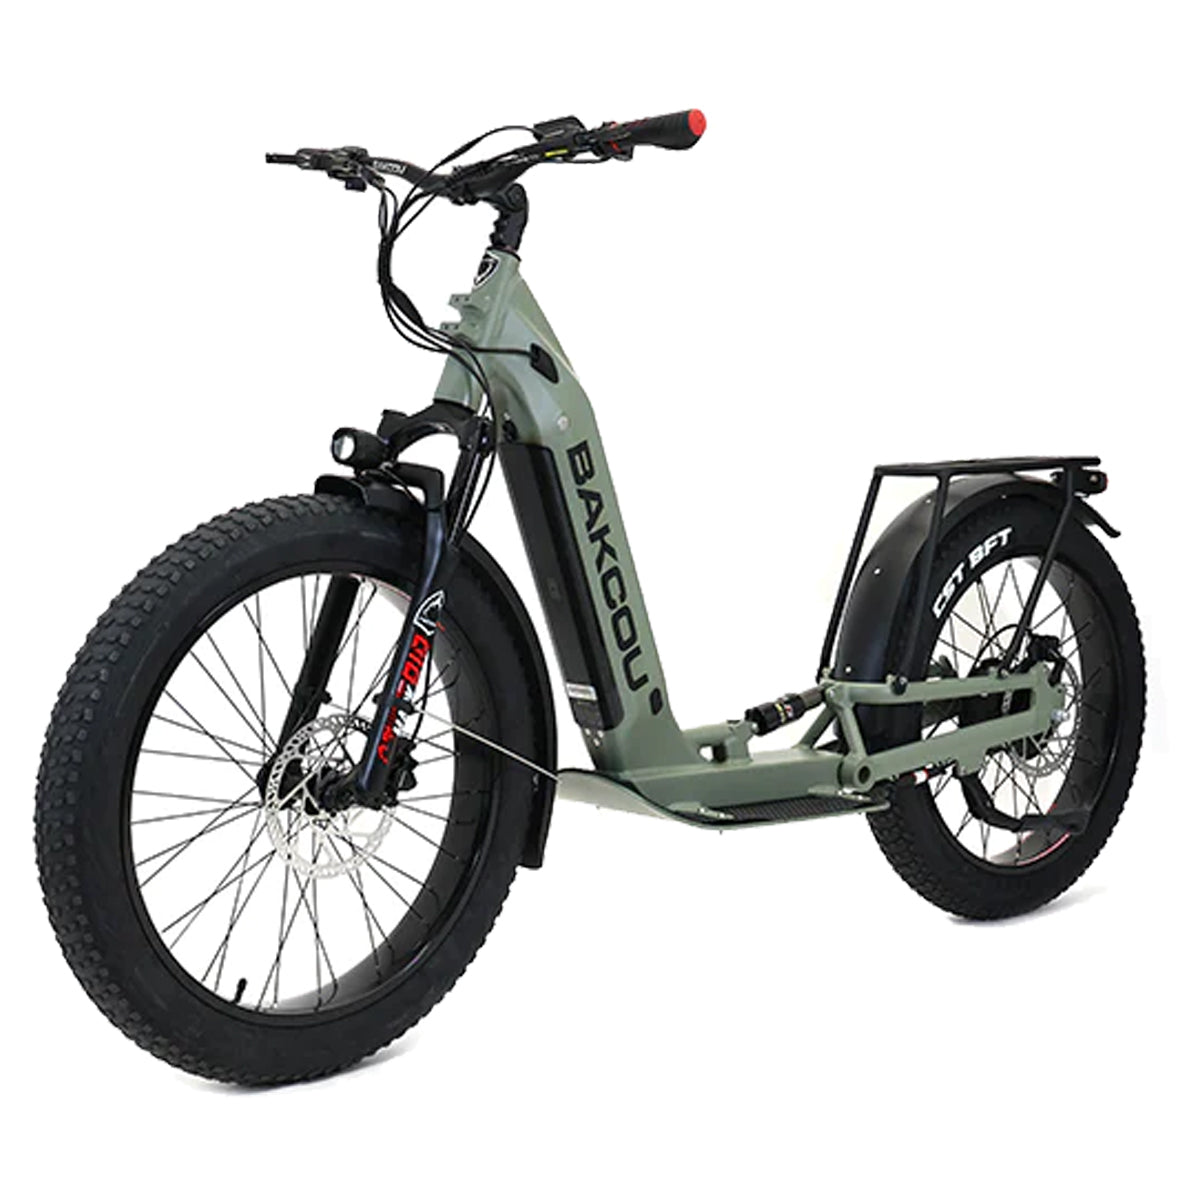 Bakcou Grizzly Electric Scooter in Sage Green by GOHUNT | Bakcou - GOHUNT Shop